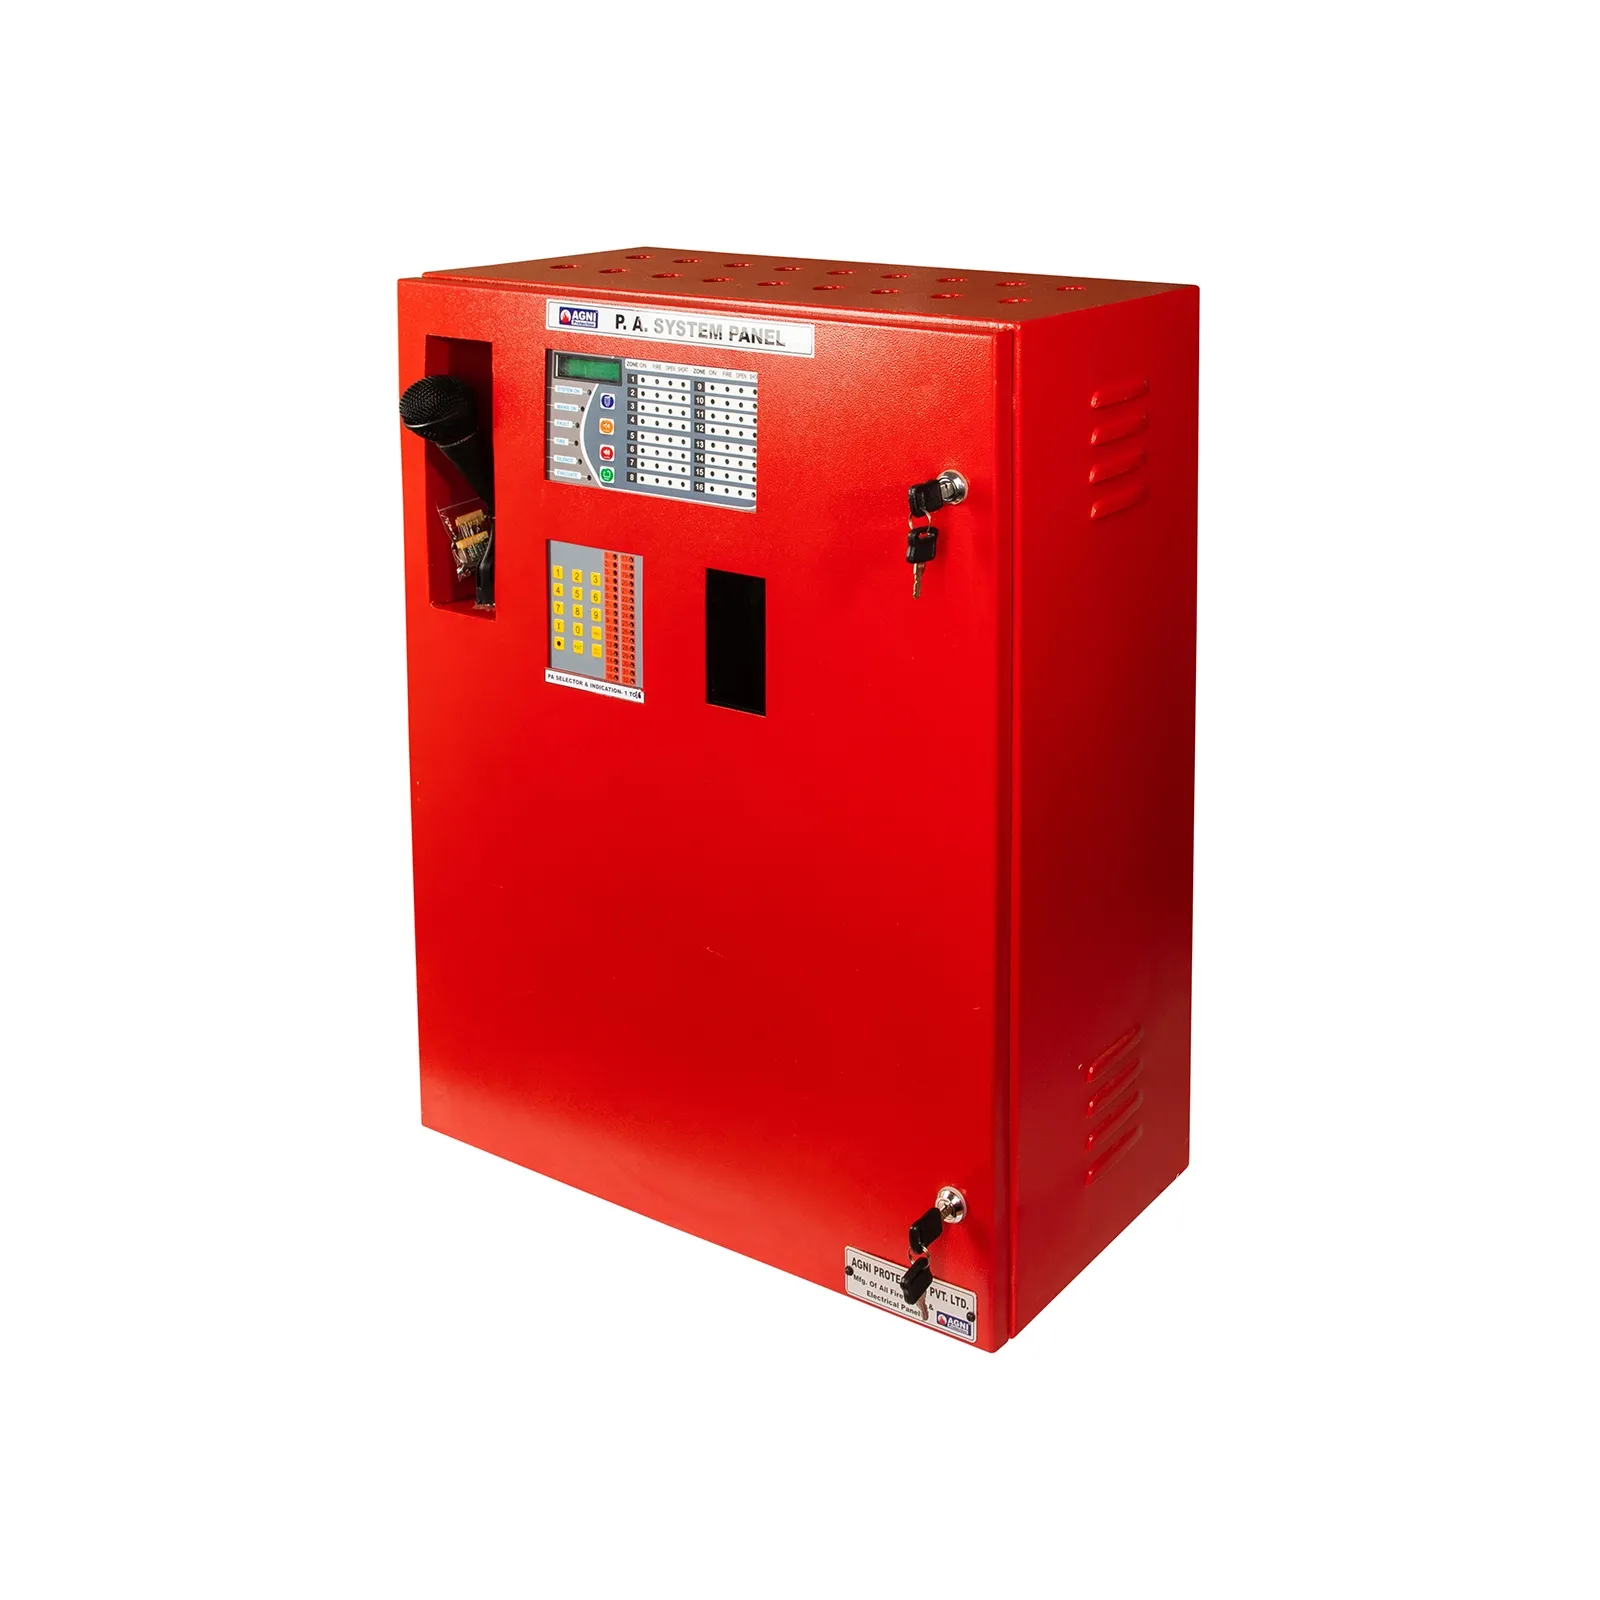 16 ZONE FIRE ALARM WITH PA SYSTEM